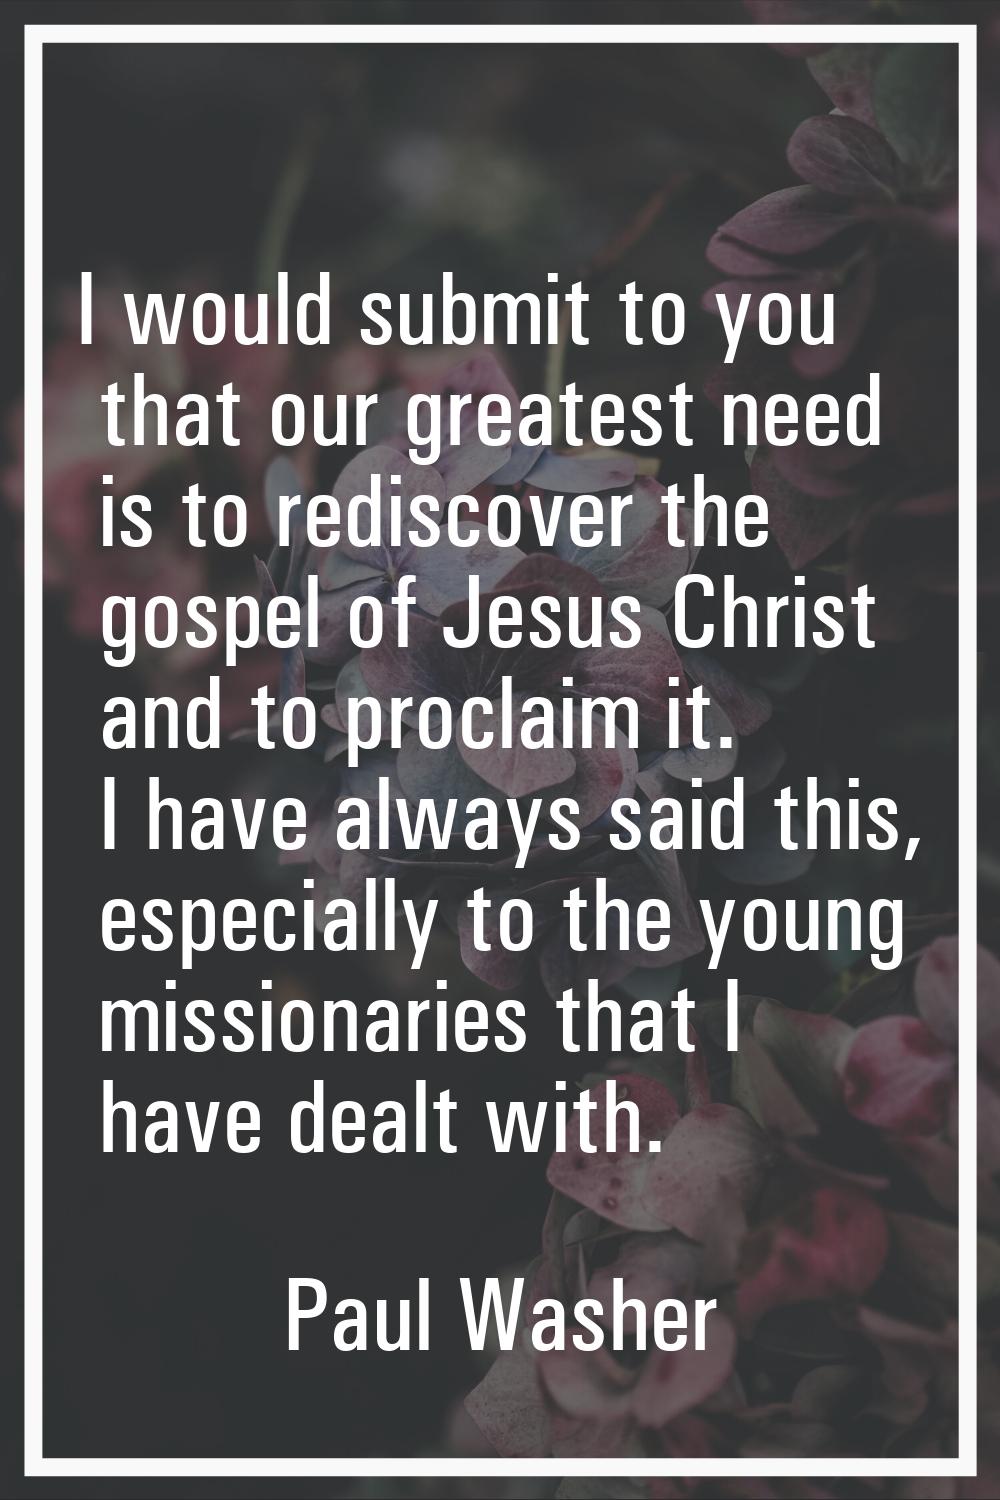 I would submit to you that our greatest need is to rediscover the gospel of Jesus Christ and to pro